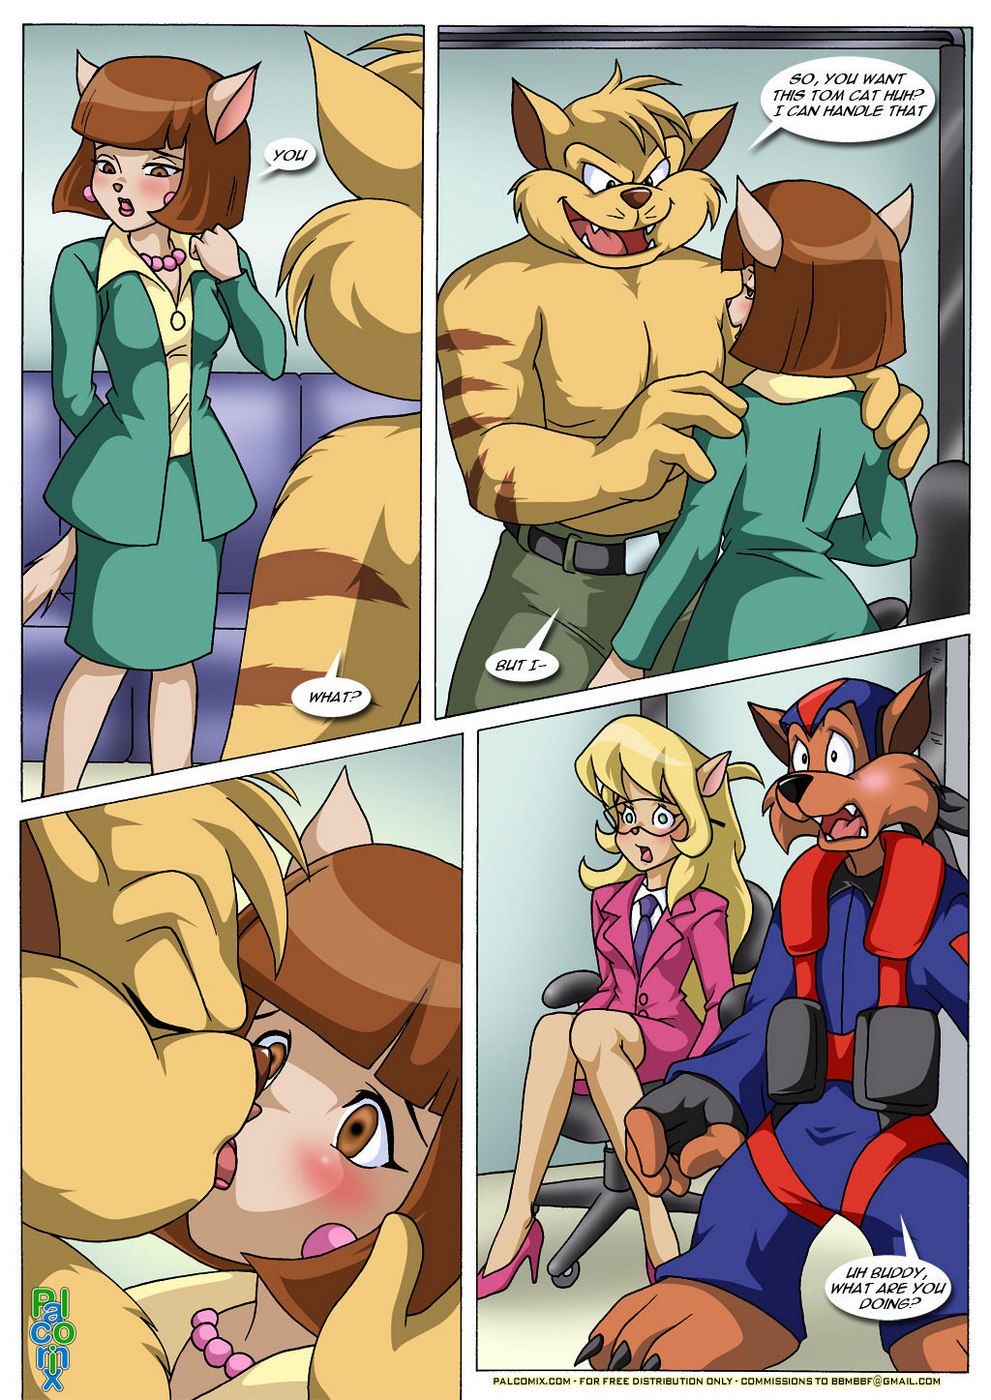 Palcomix-Furry Adult Sex-Swat Kats - Busted page 5